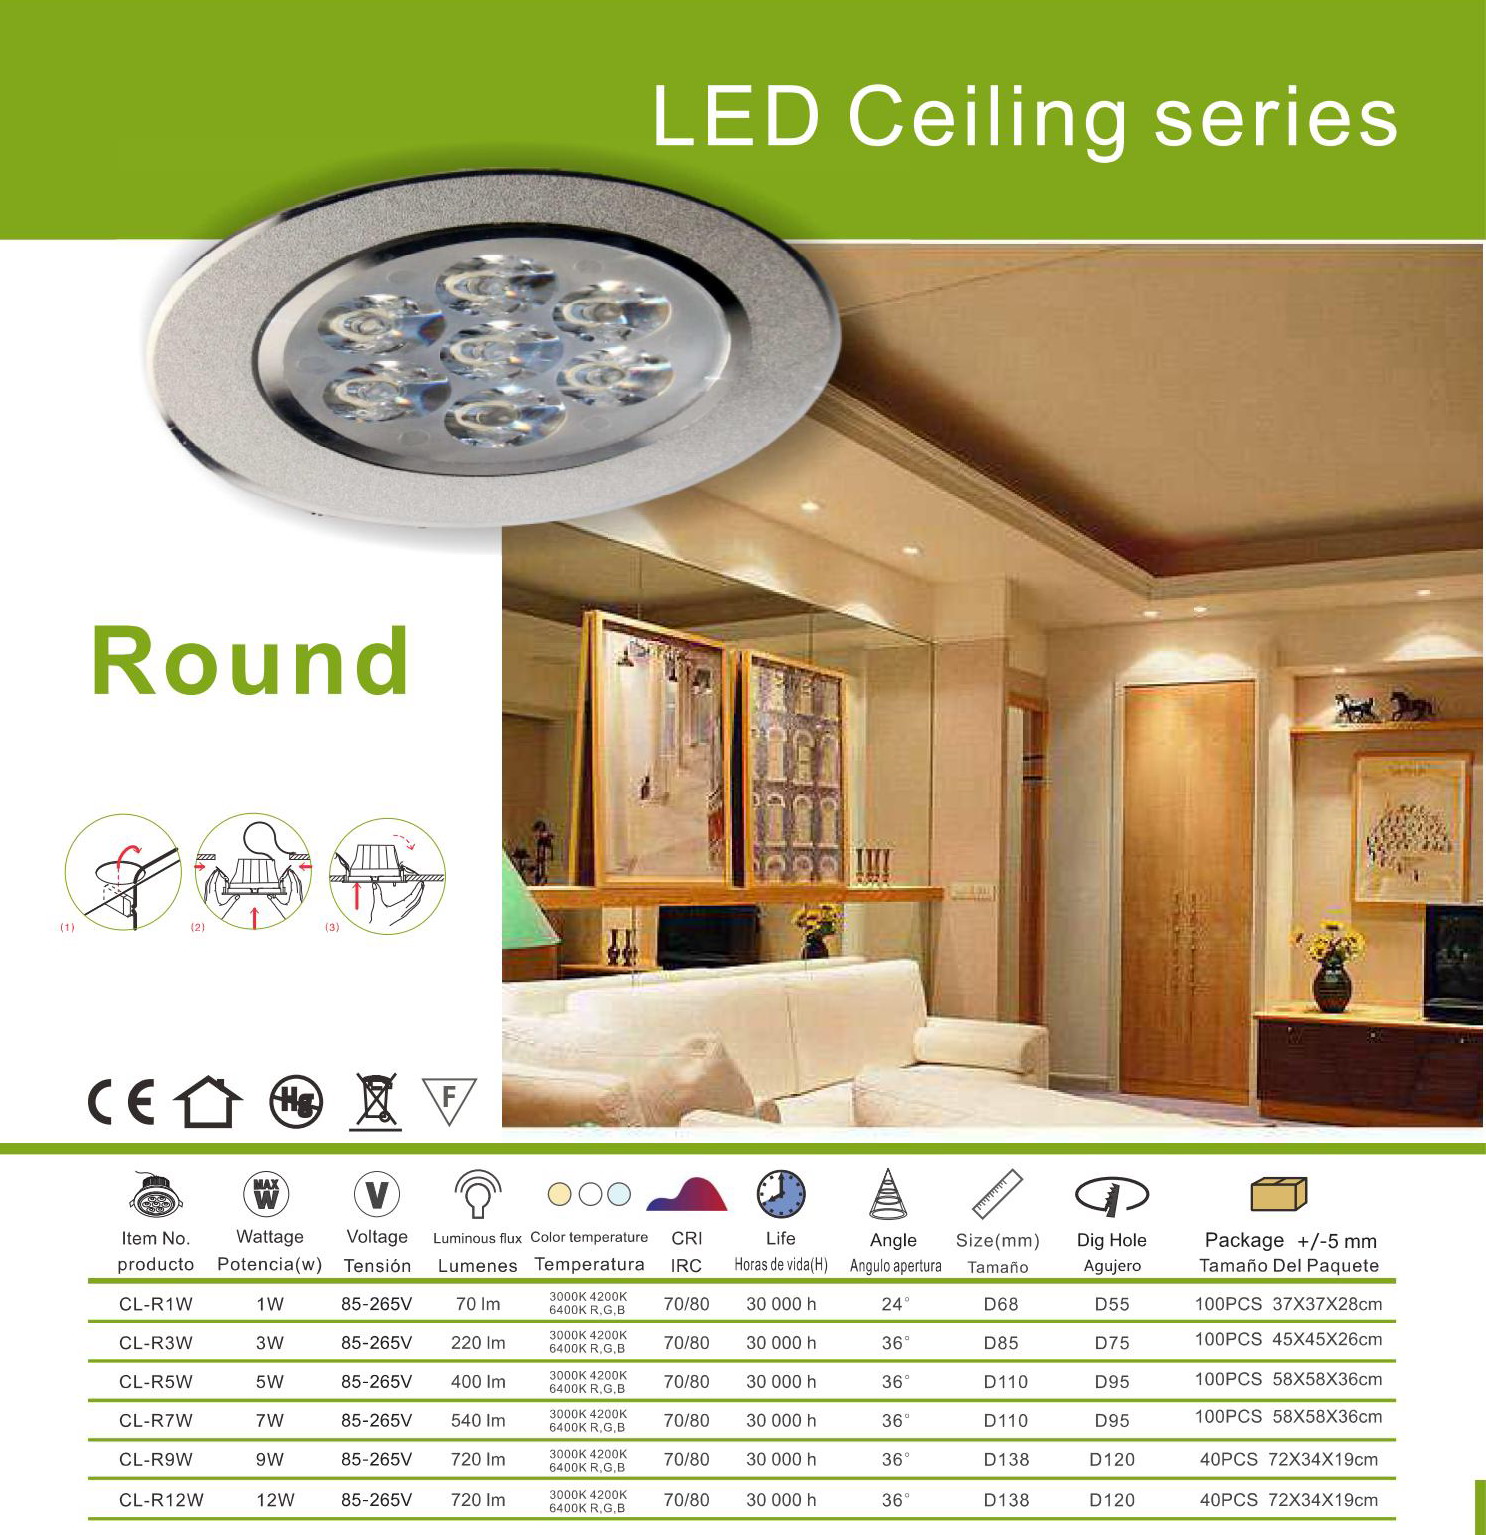 LED Ceiling series